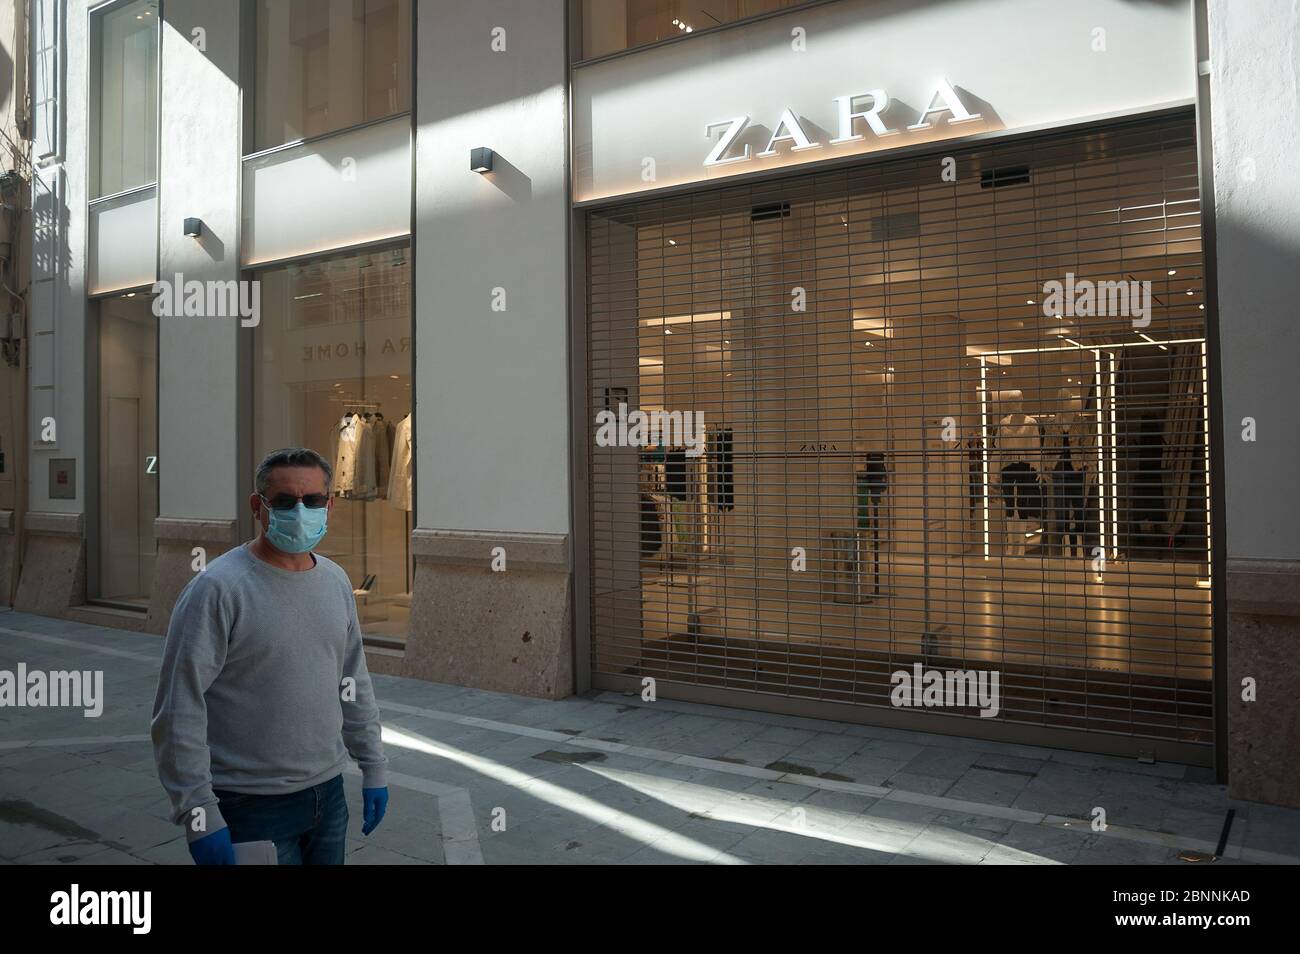 A man wearing a face mask as a precaution walks past a closed 'Zara' store  during the partial lockdown after the beginning of phase 1 in some cities. Spain is going through the